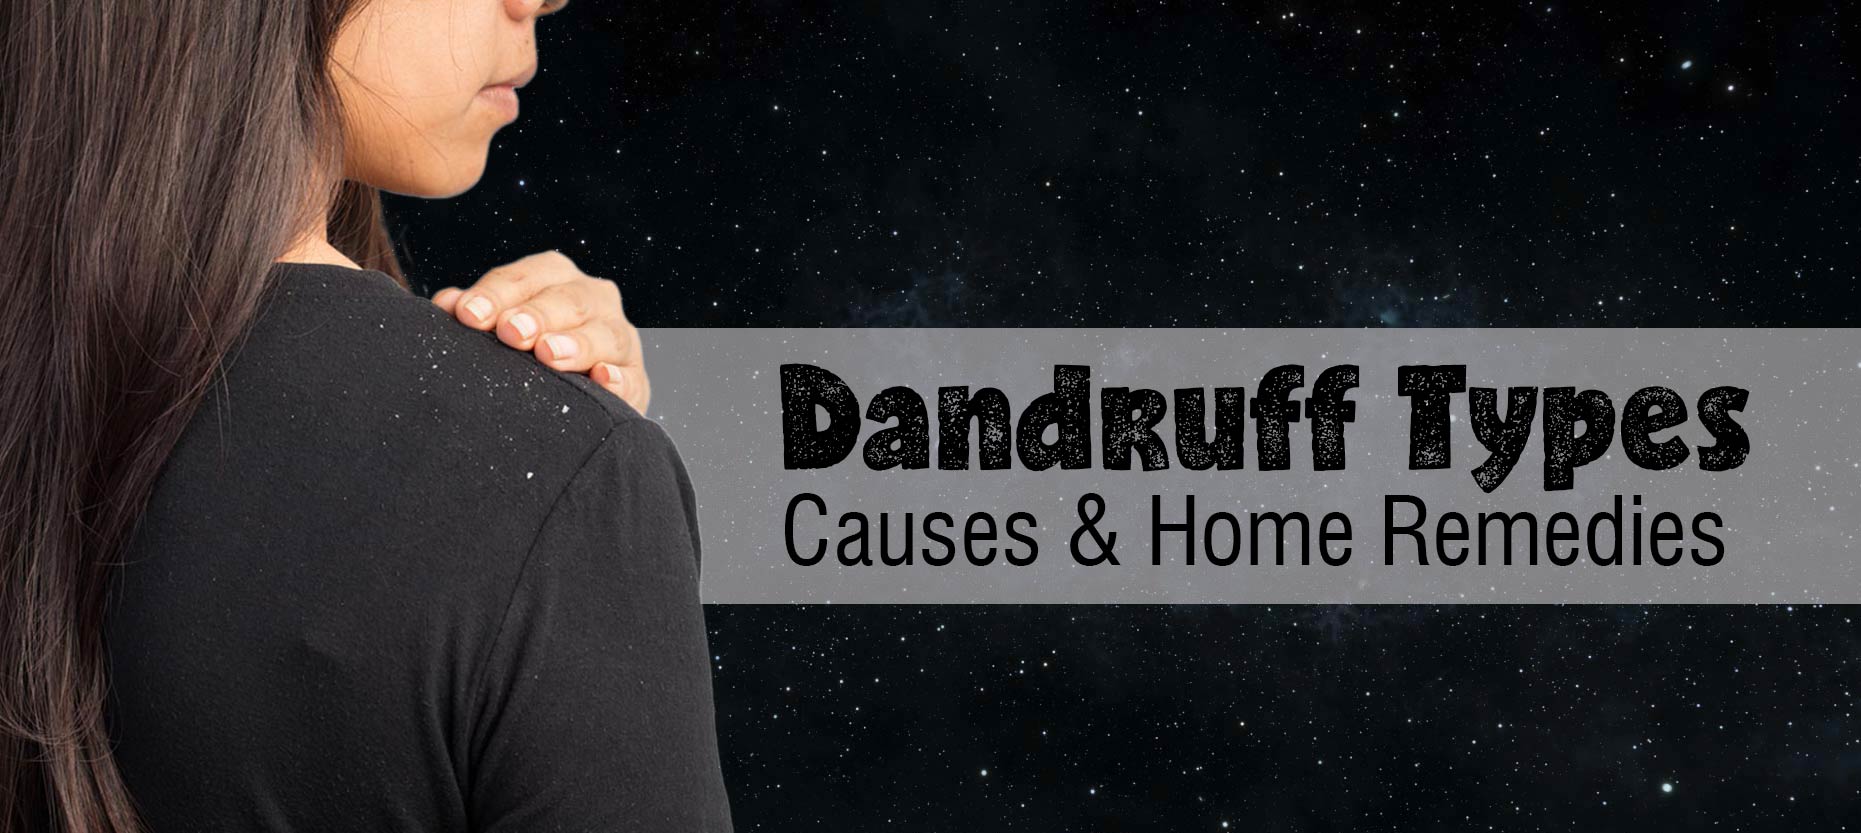 Dandruff: Types, Causes & Home Remedies